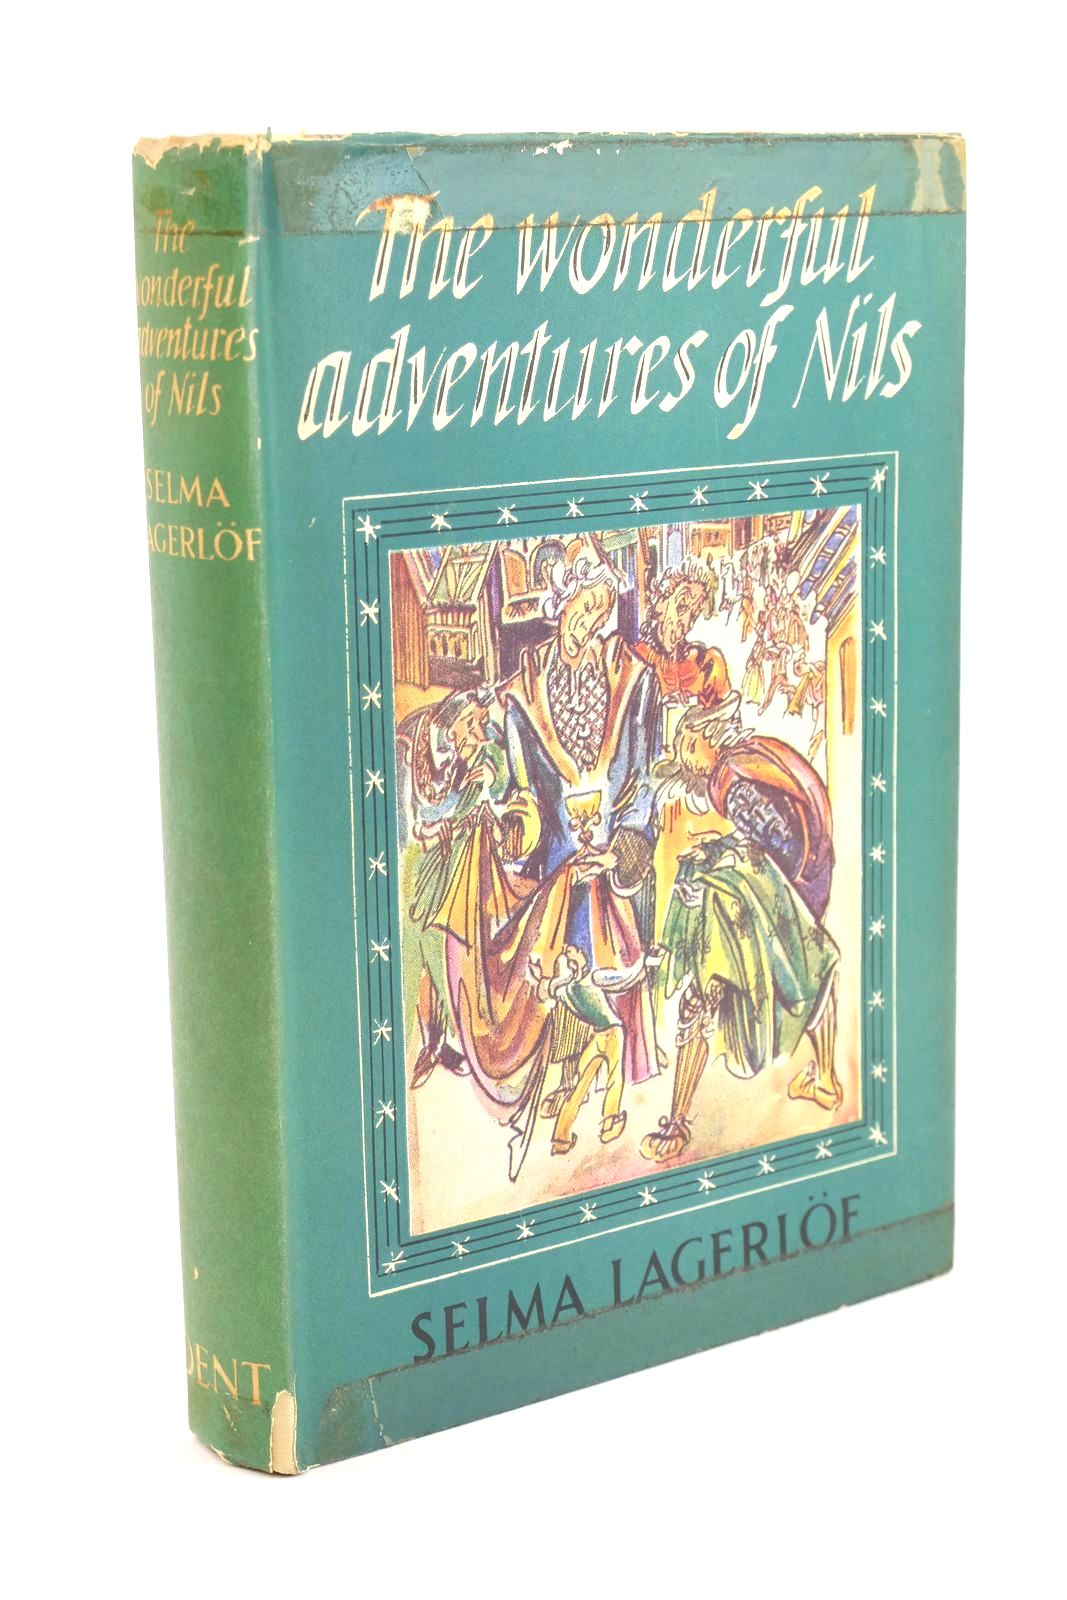 Photo of THE WONDERFUL ADVENTURES OF NILS written by Lagerlof, Selma illustrated by Baumhauer, H. published by J.M. Dent &amp; Sons Ltd. (STOCK CODE: 1323724)  for sale by Stella & Rose's Books